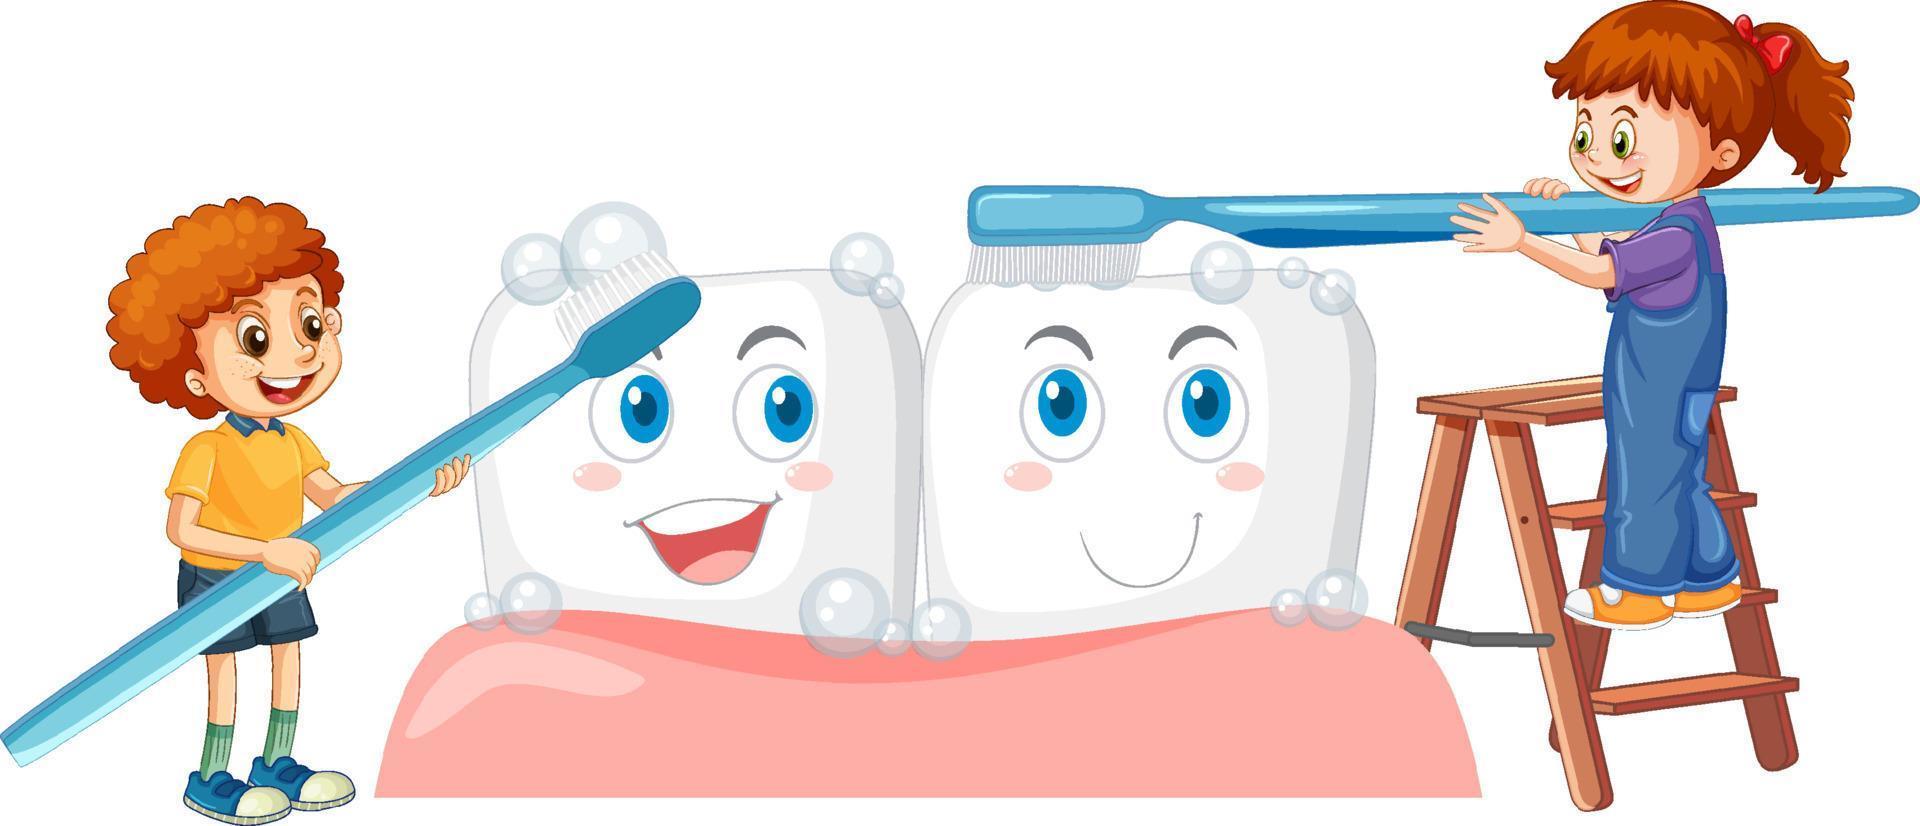 Children brushing whiten teeth with a toothbrush on white background vector